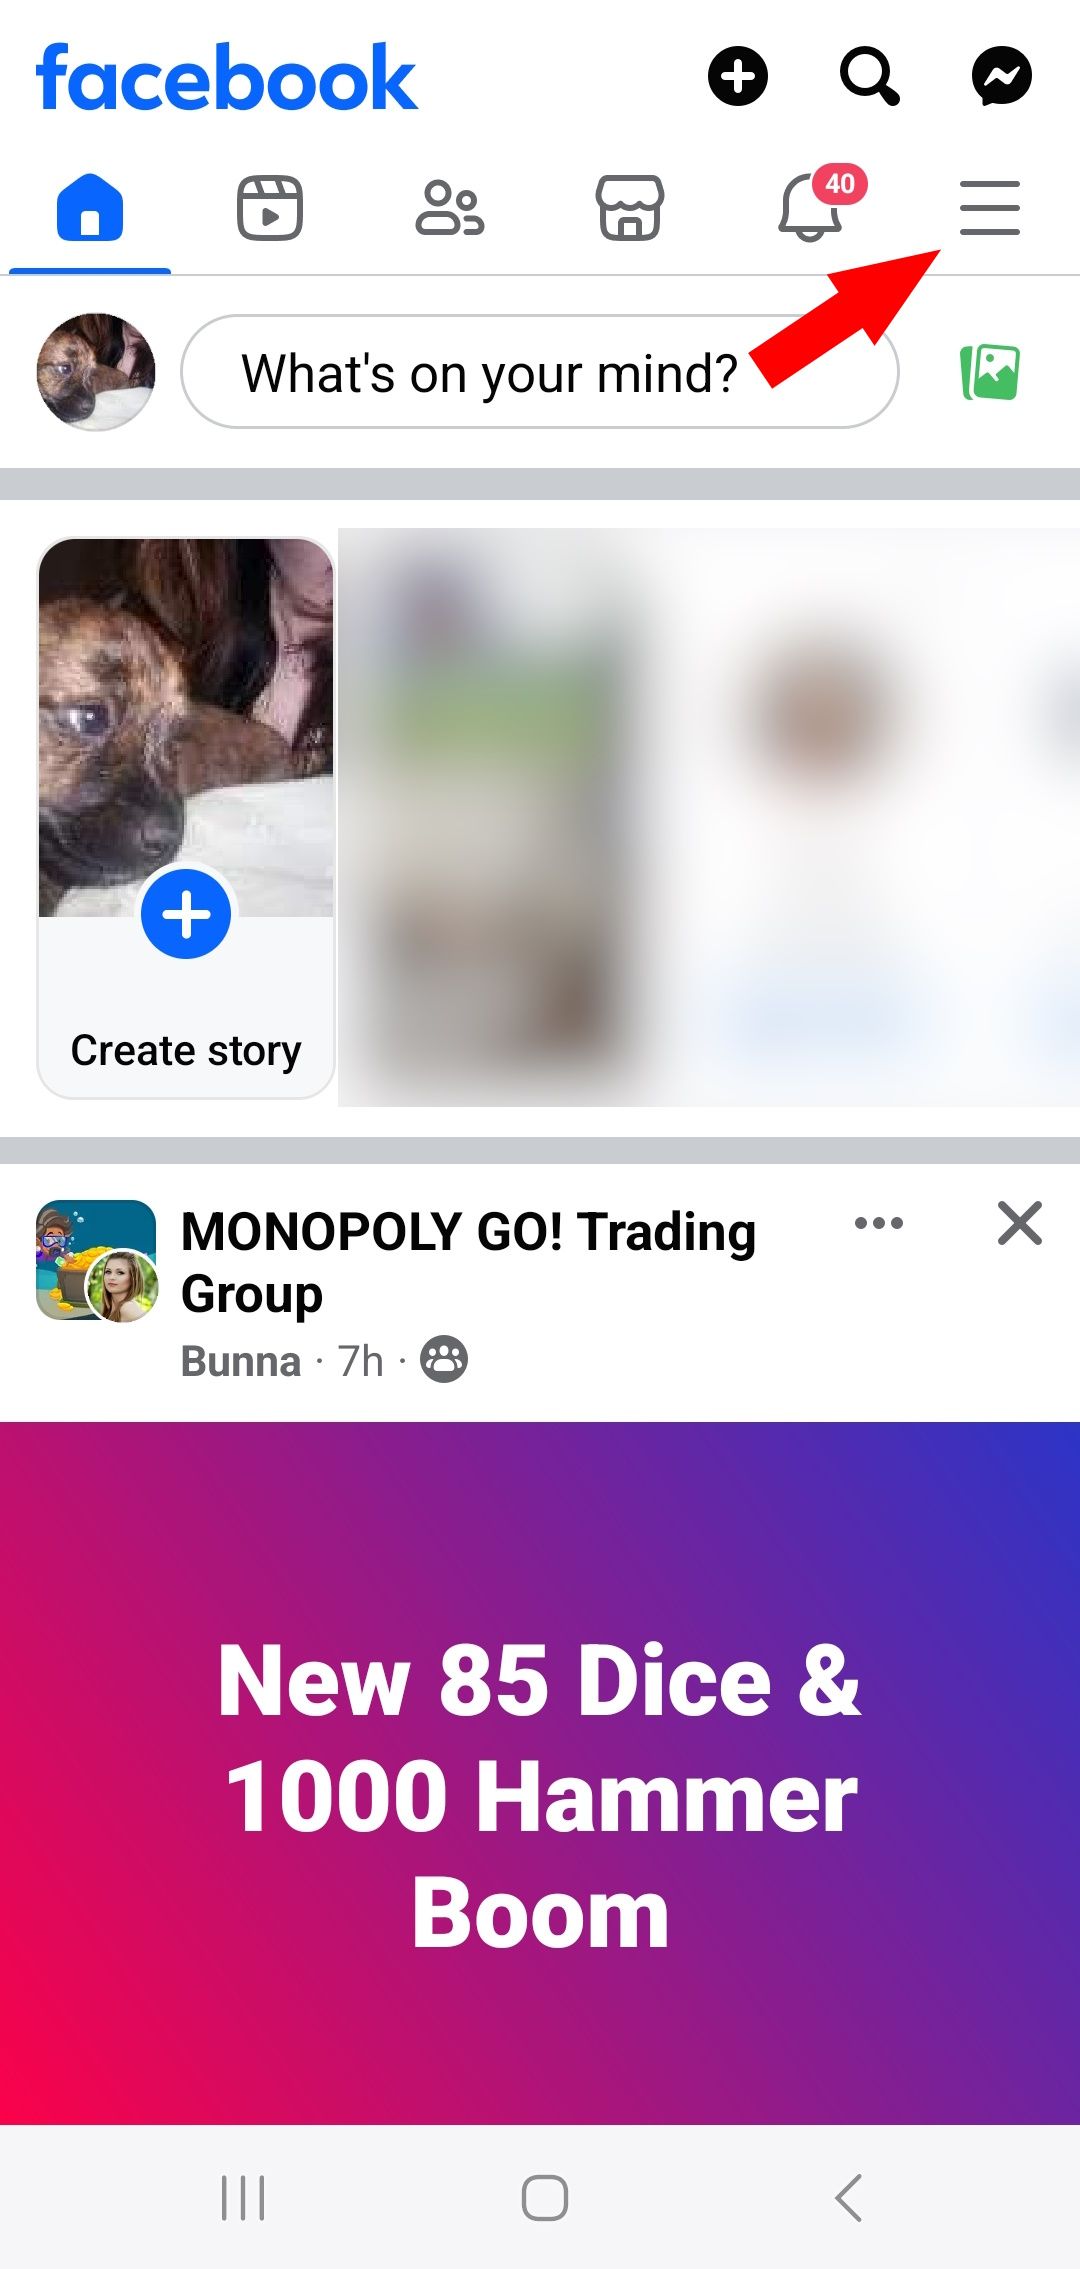 red solid arrow pointing to menu icon on facebook mobile app home page